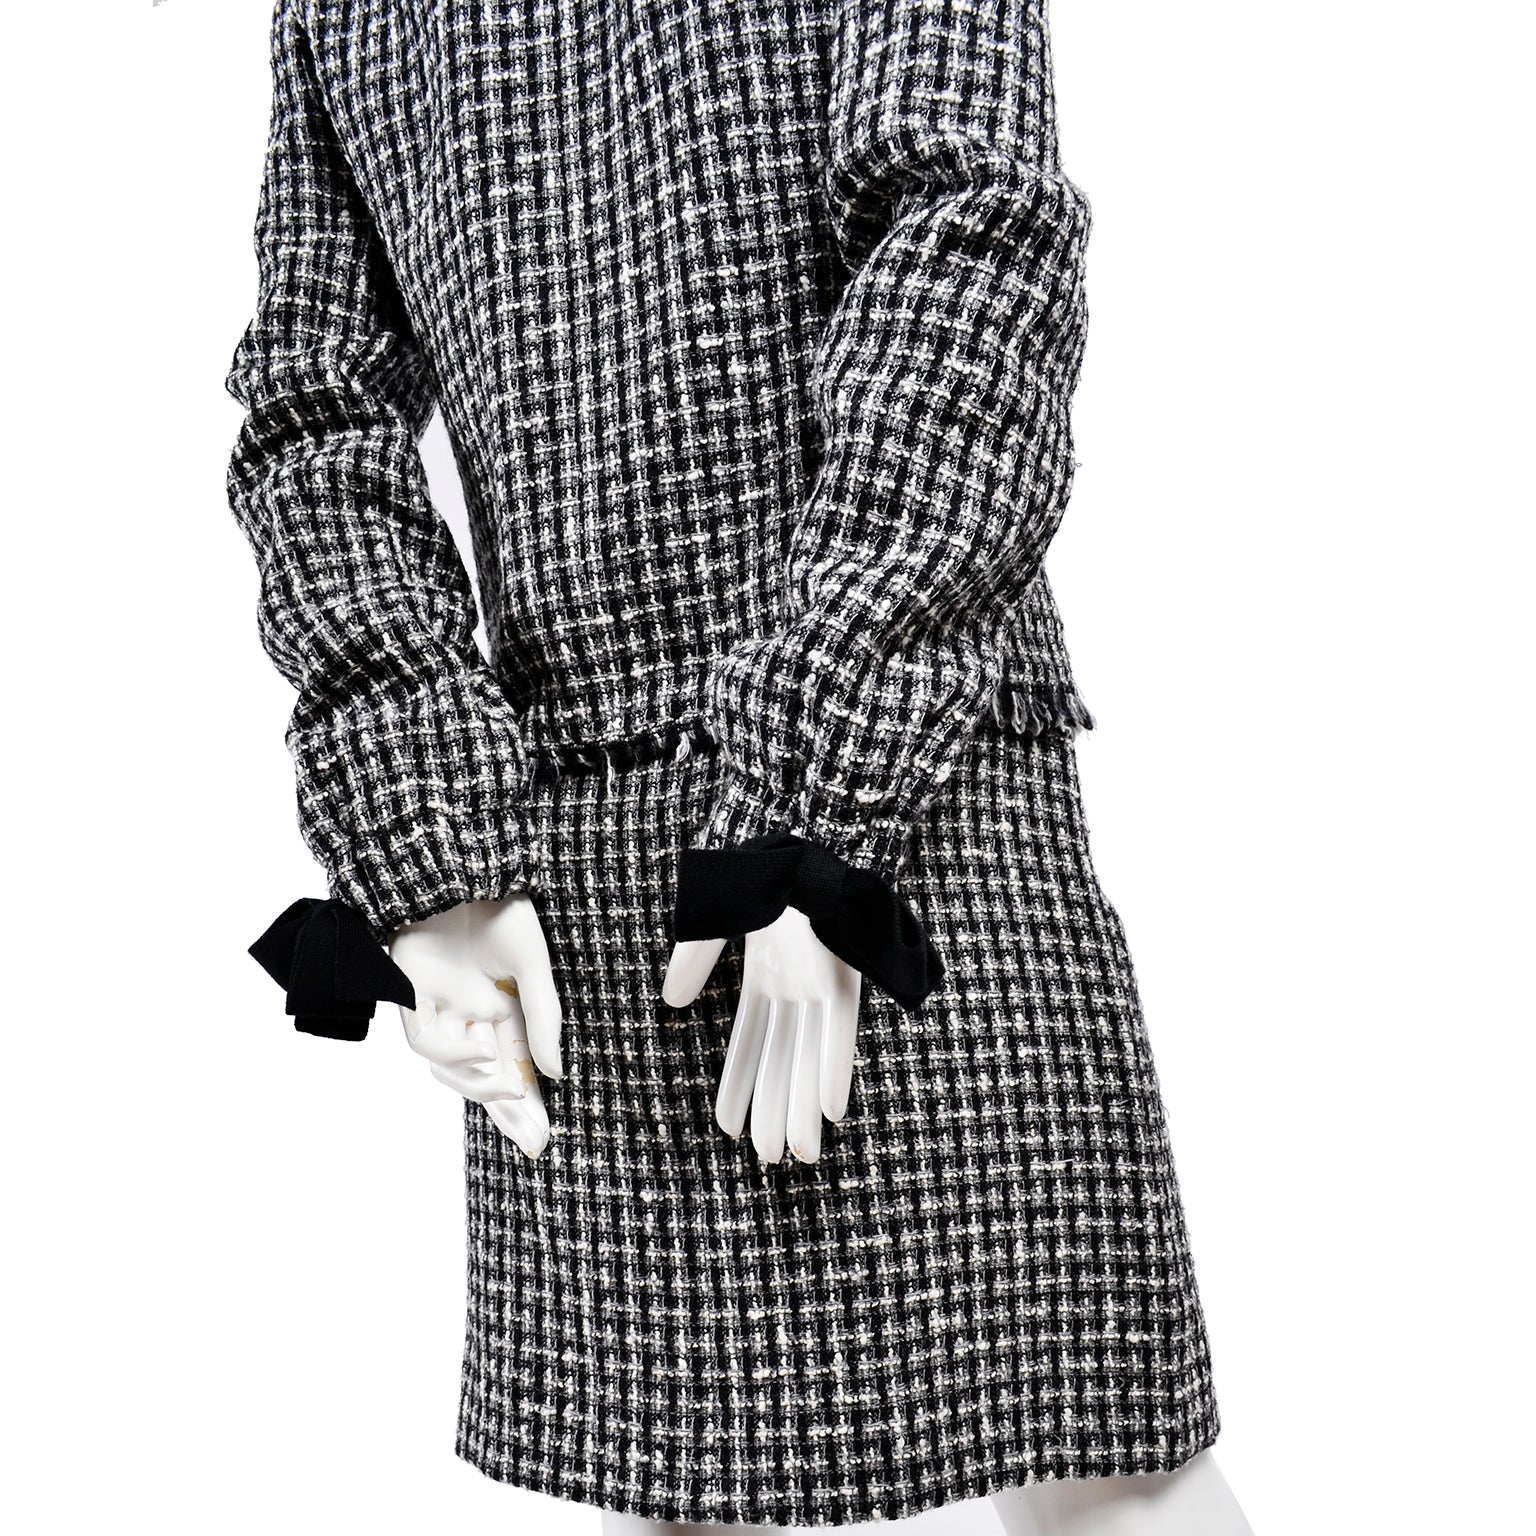 Chanel Jacket & Skirt w/ Bow in Lesage Black & White Tweed from 2004 – Modig